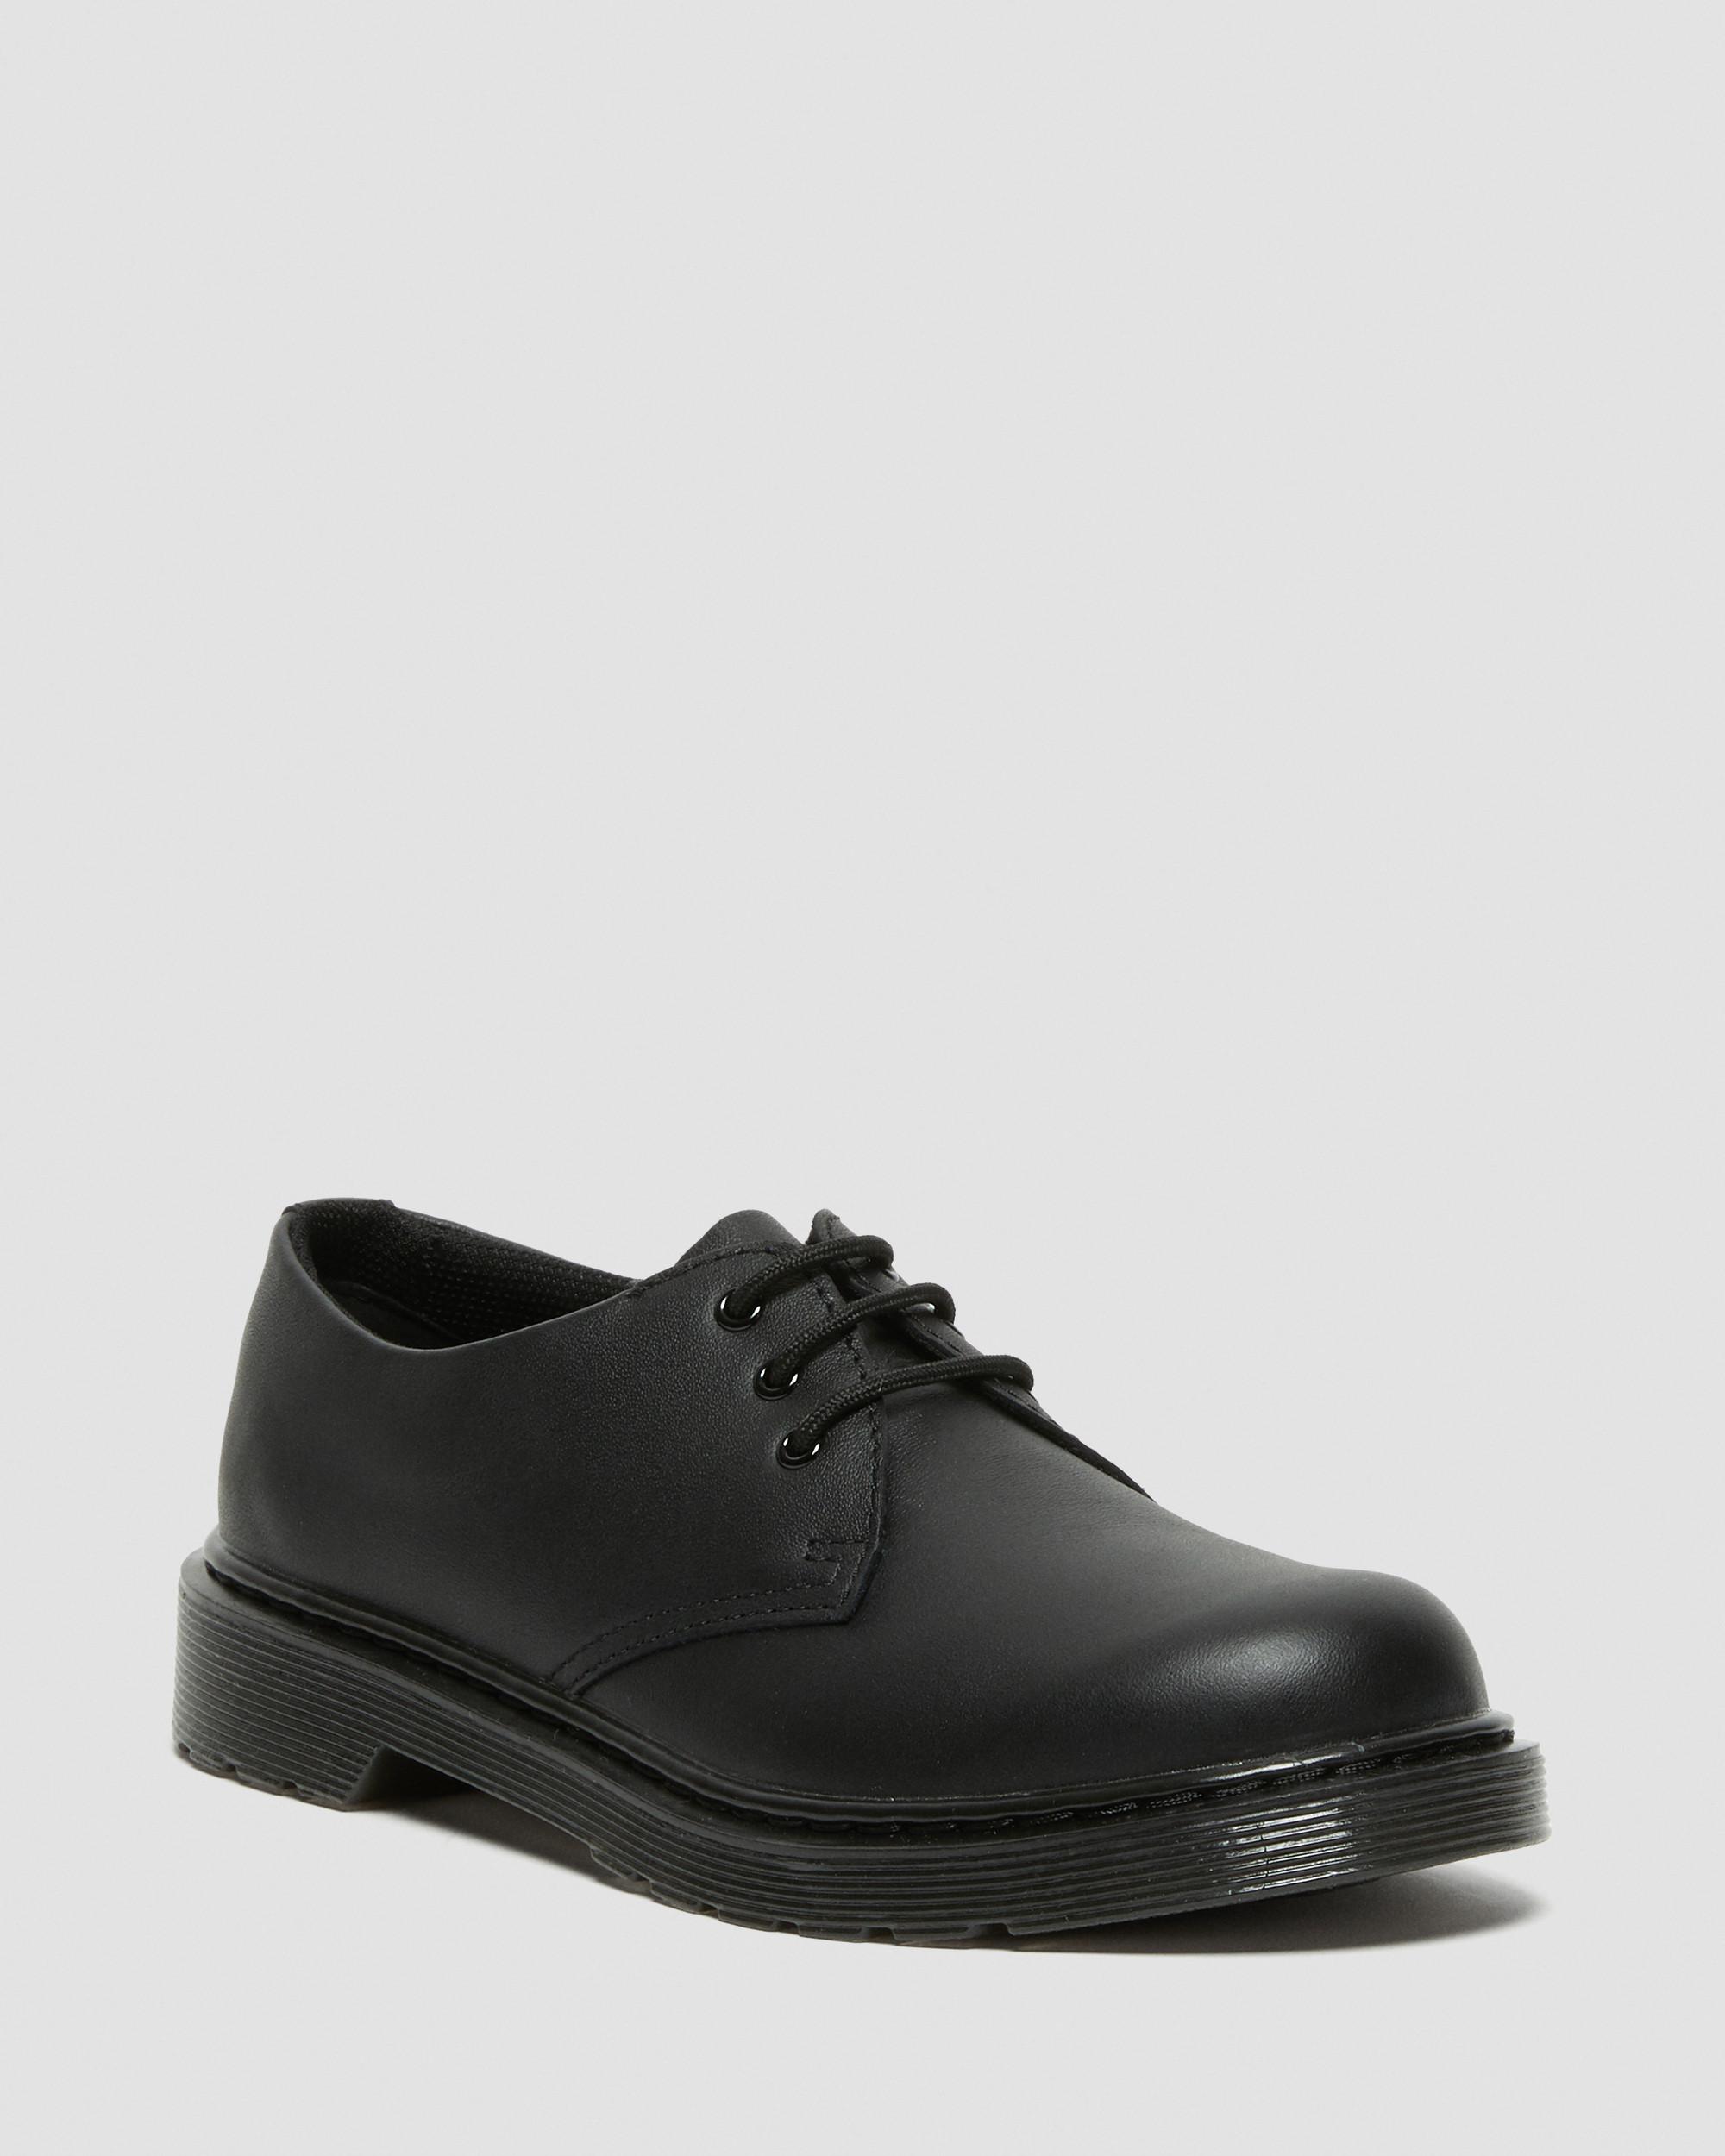 Youth 1461 Mono Softy T Leather Shoes in Black